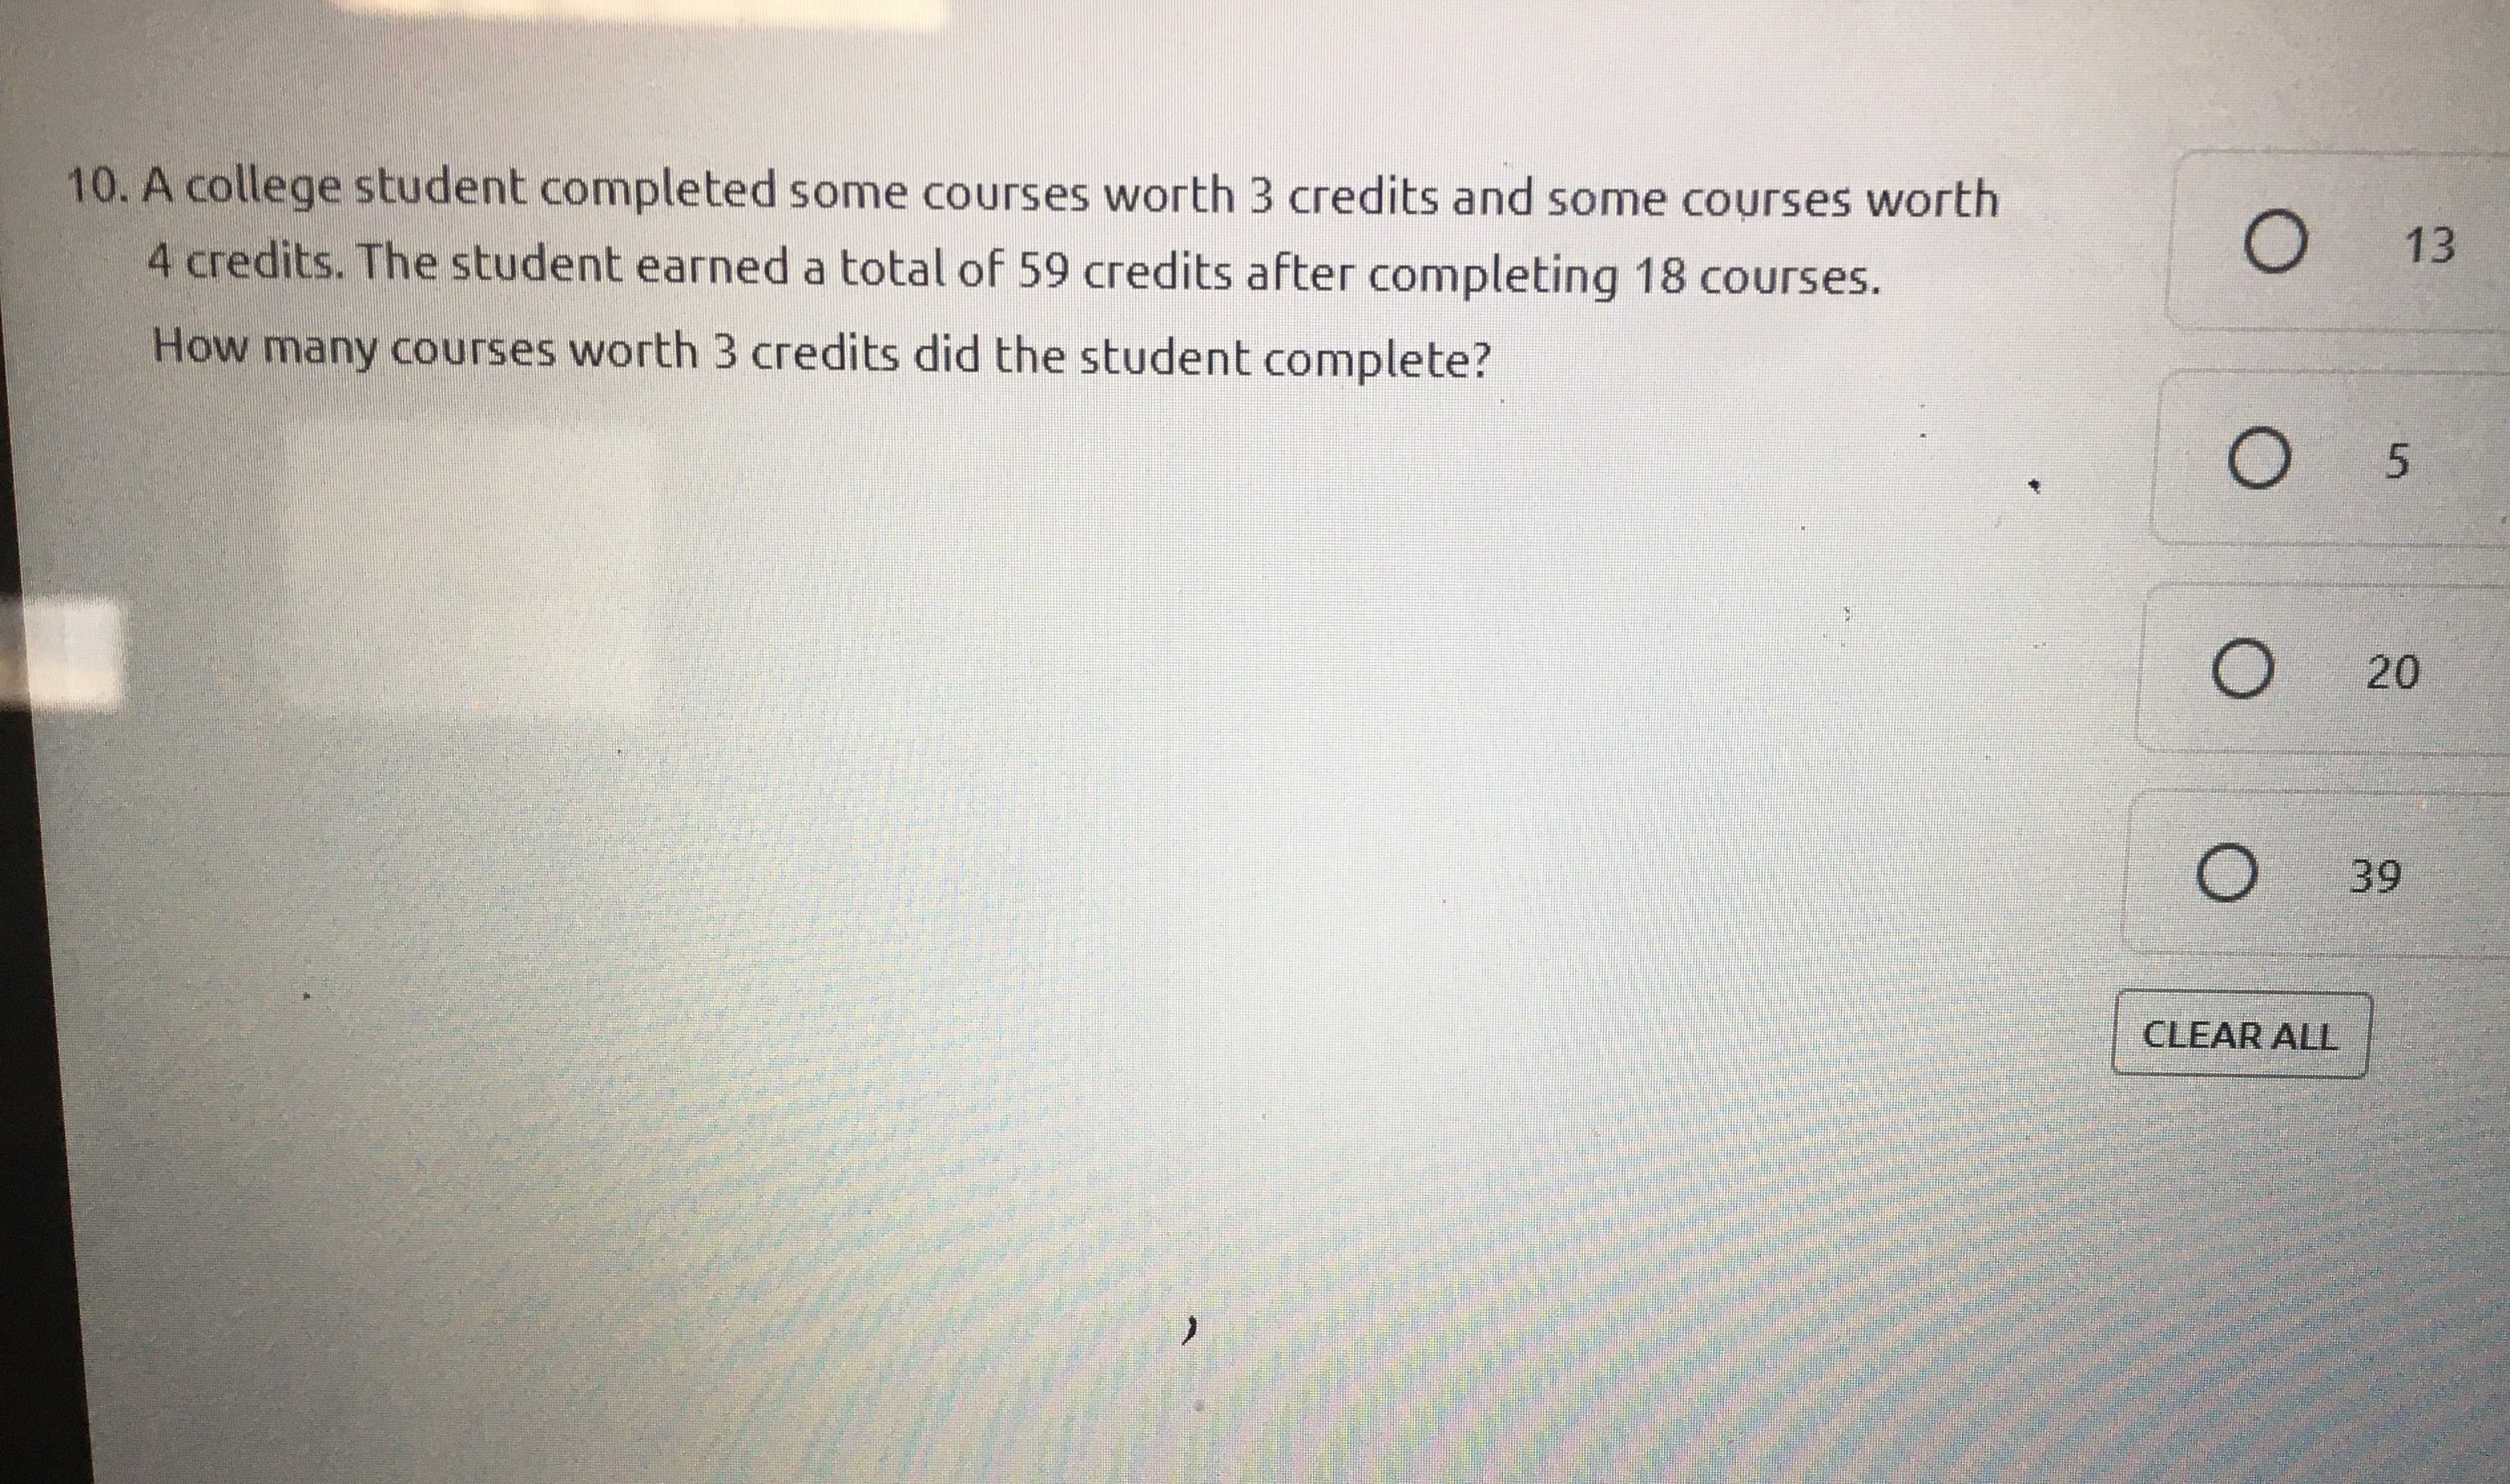 10. A college student completed some courses worth...